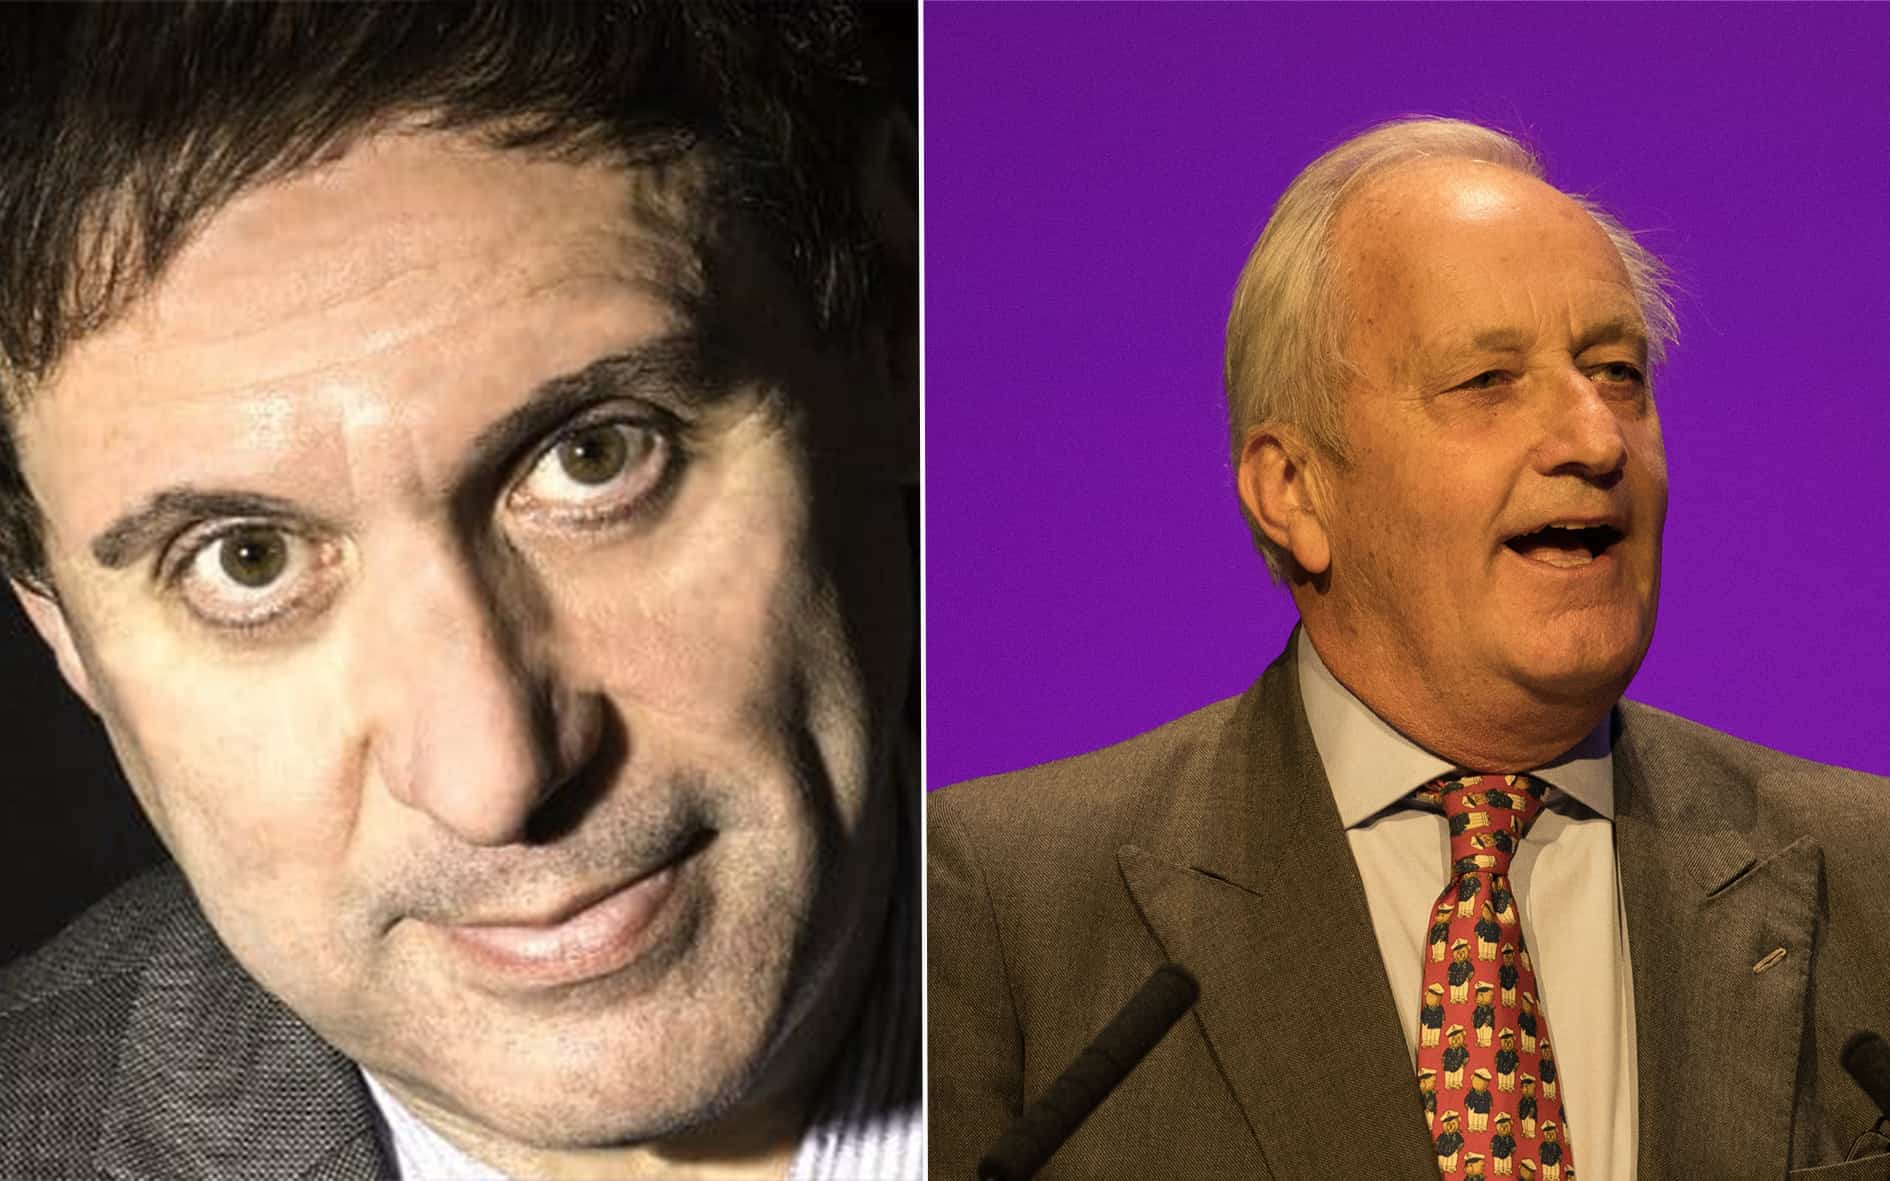 UKIP leader who promised to leave Westminster “quaking” replaced after 3 months